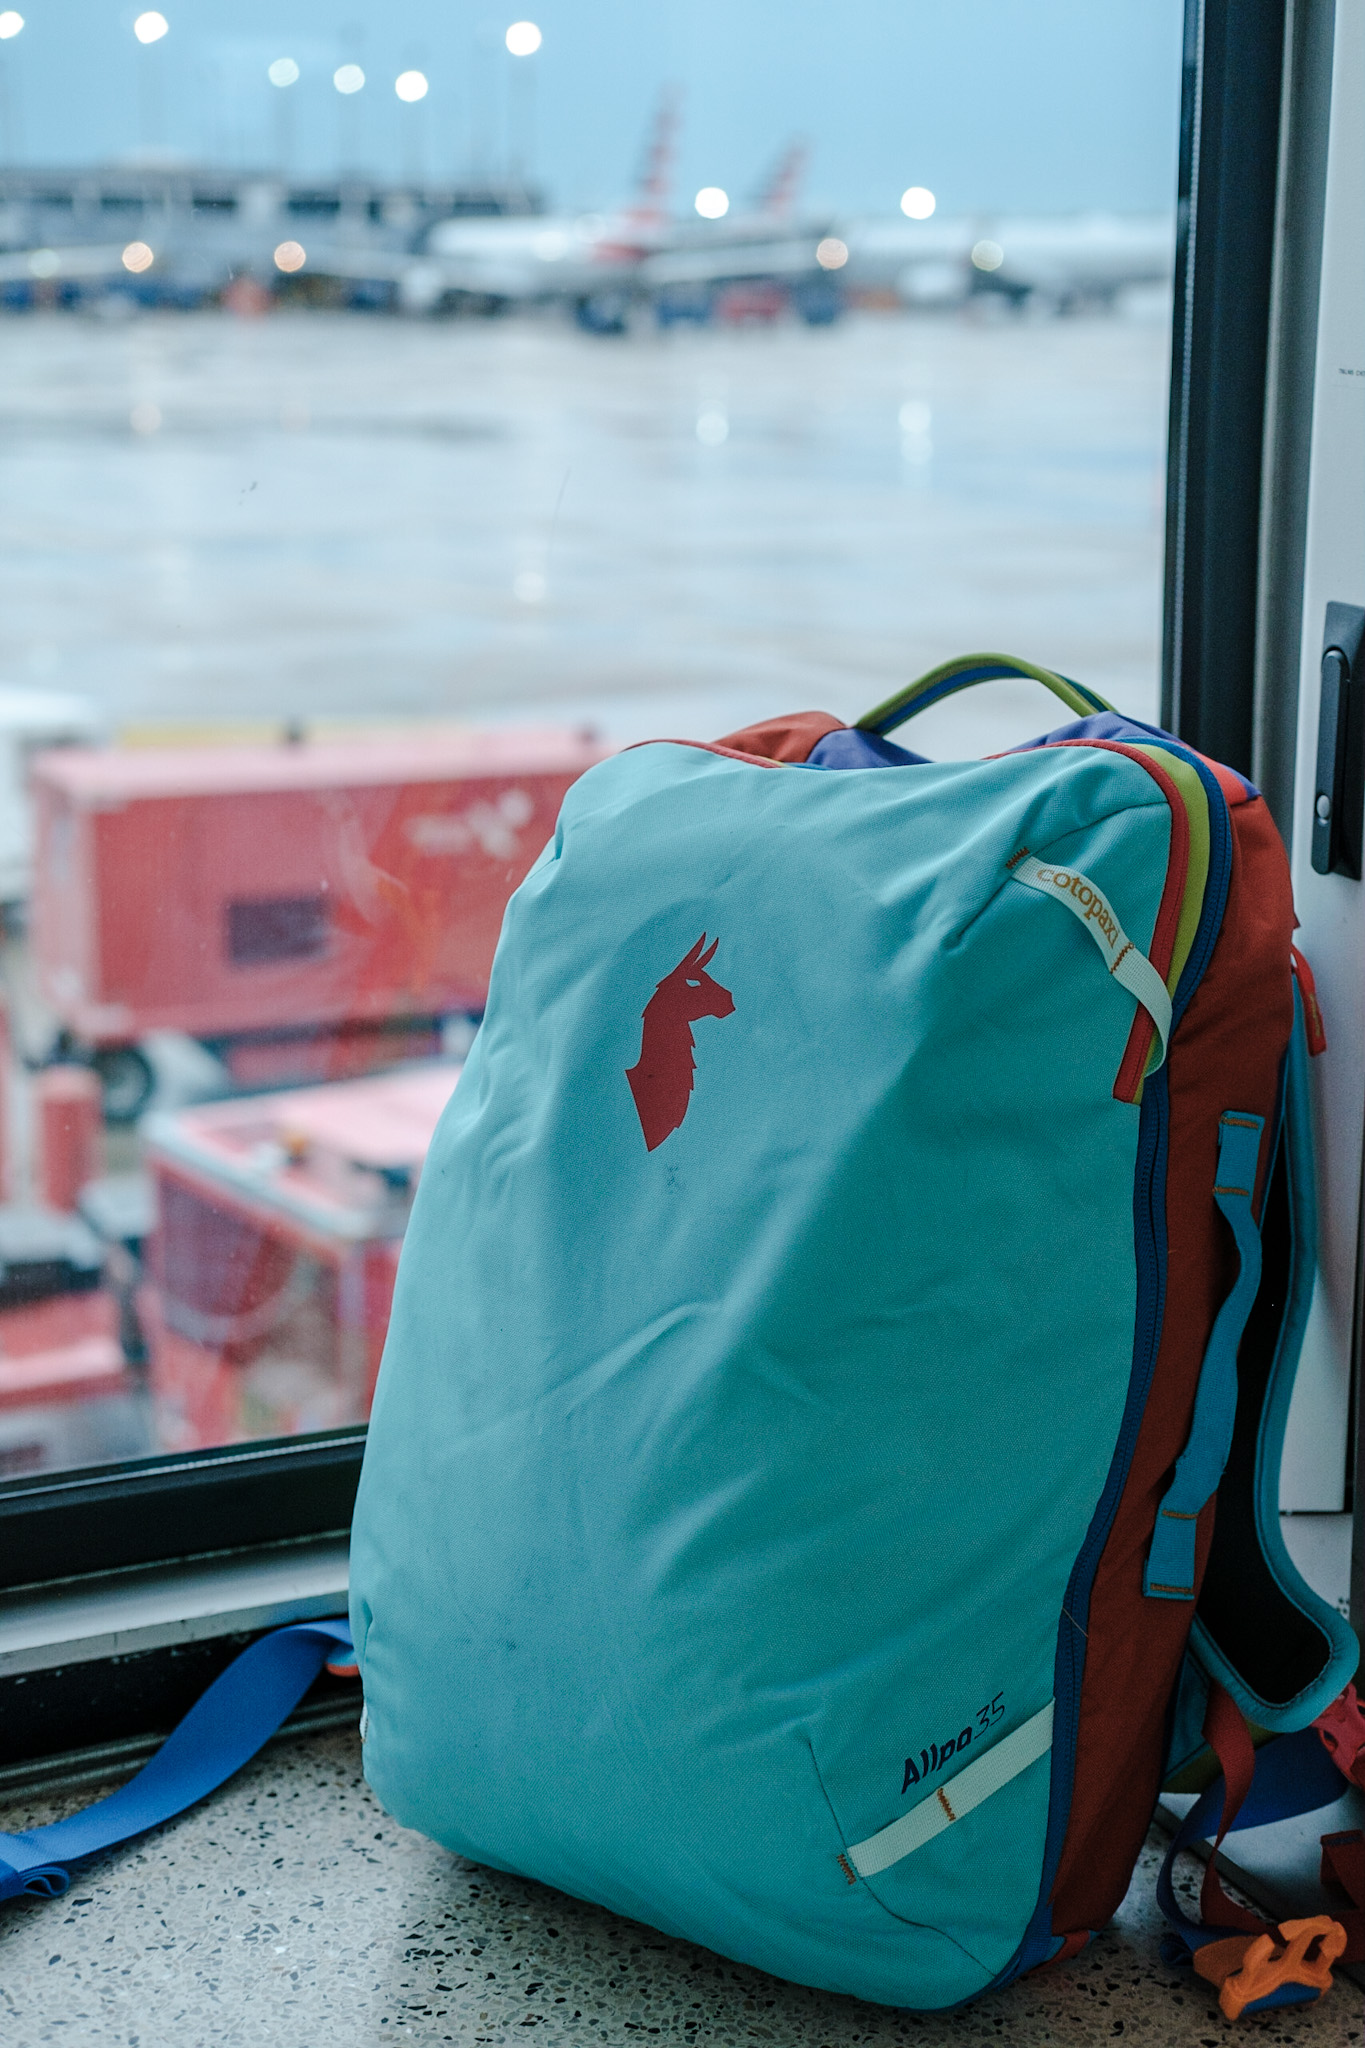 Cotopaxi Allpa 35L fully loaded in an airport terminal